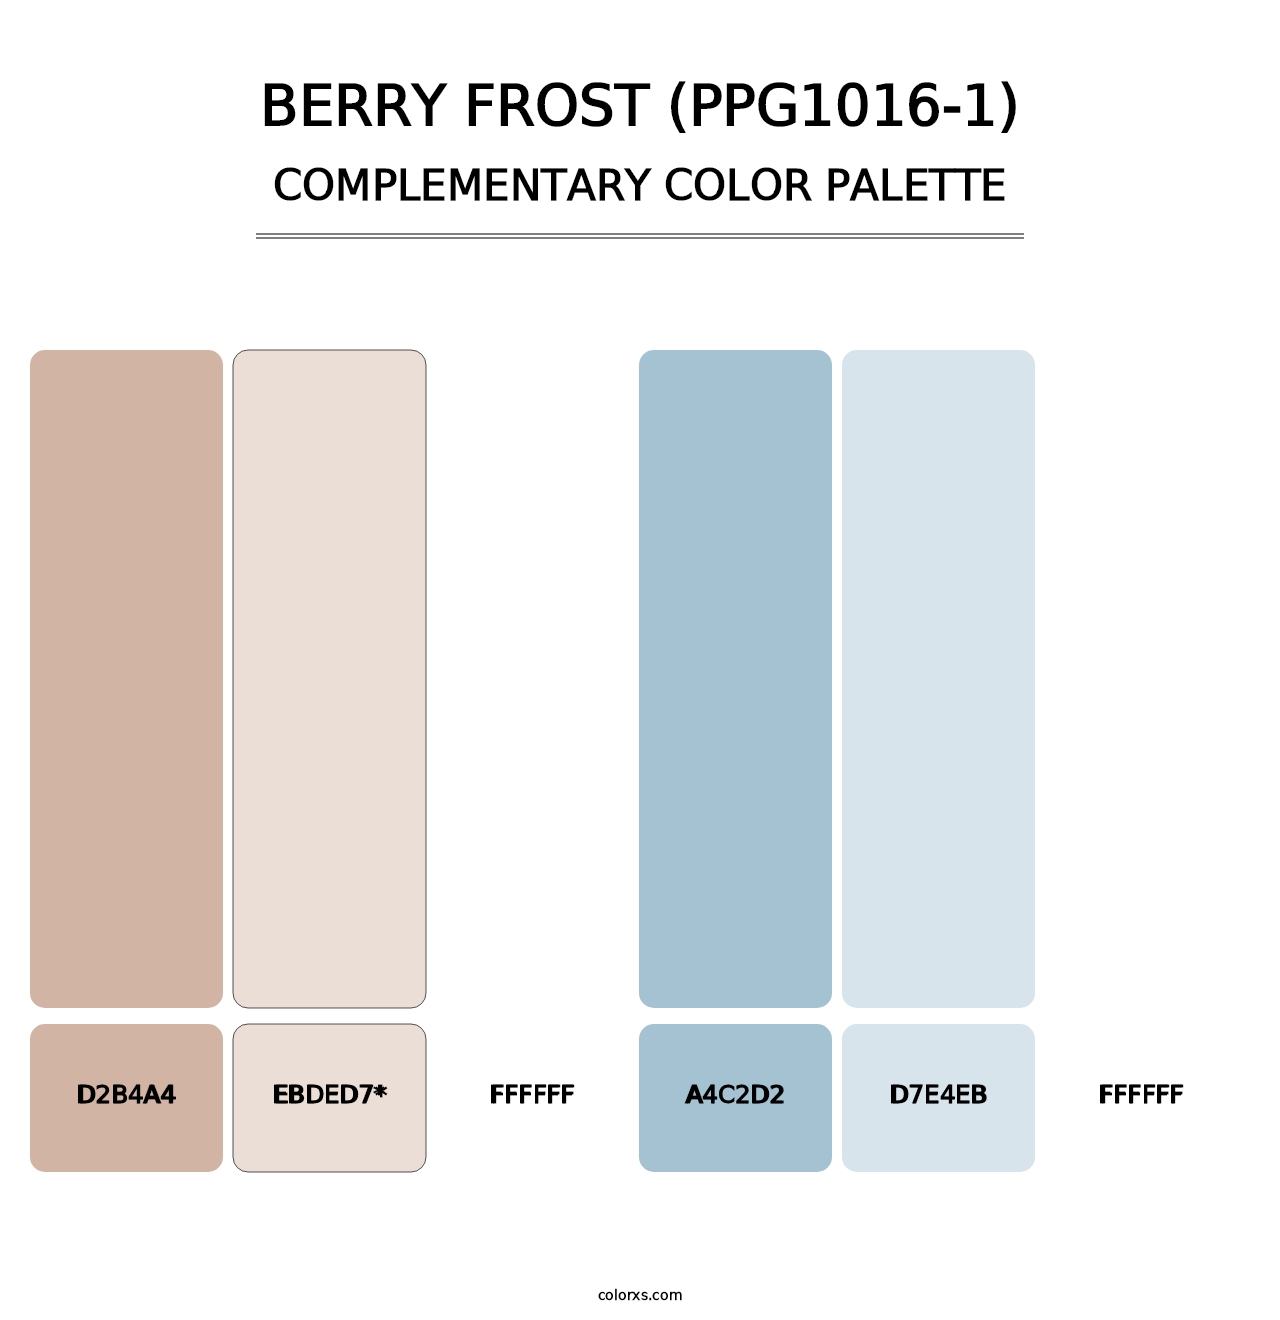 Berry Frost (PPG1016-1) - Complementary Color Palette